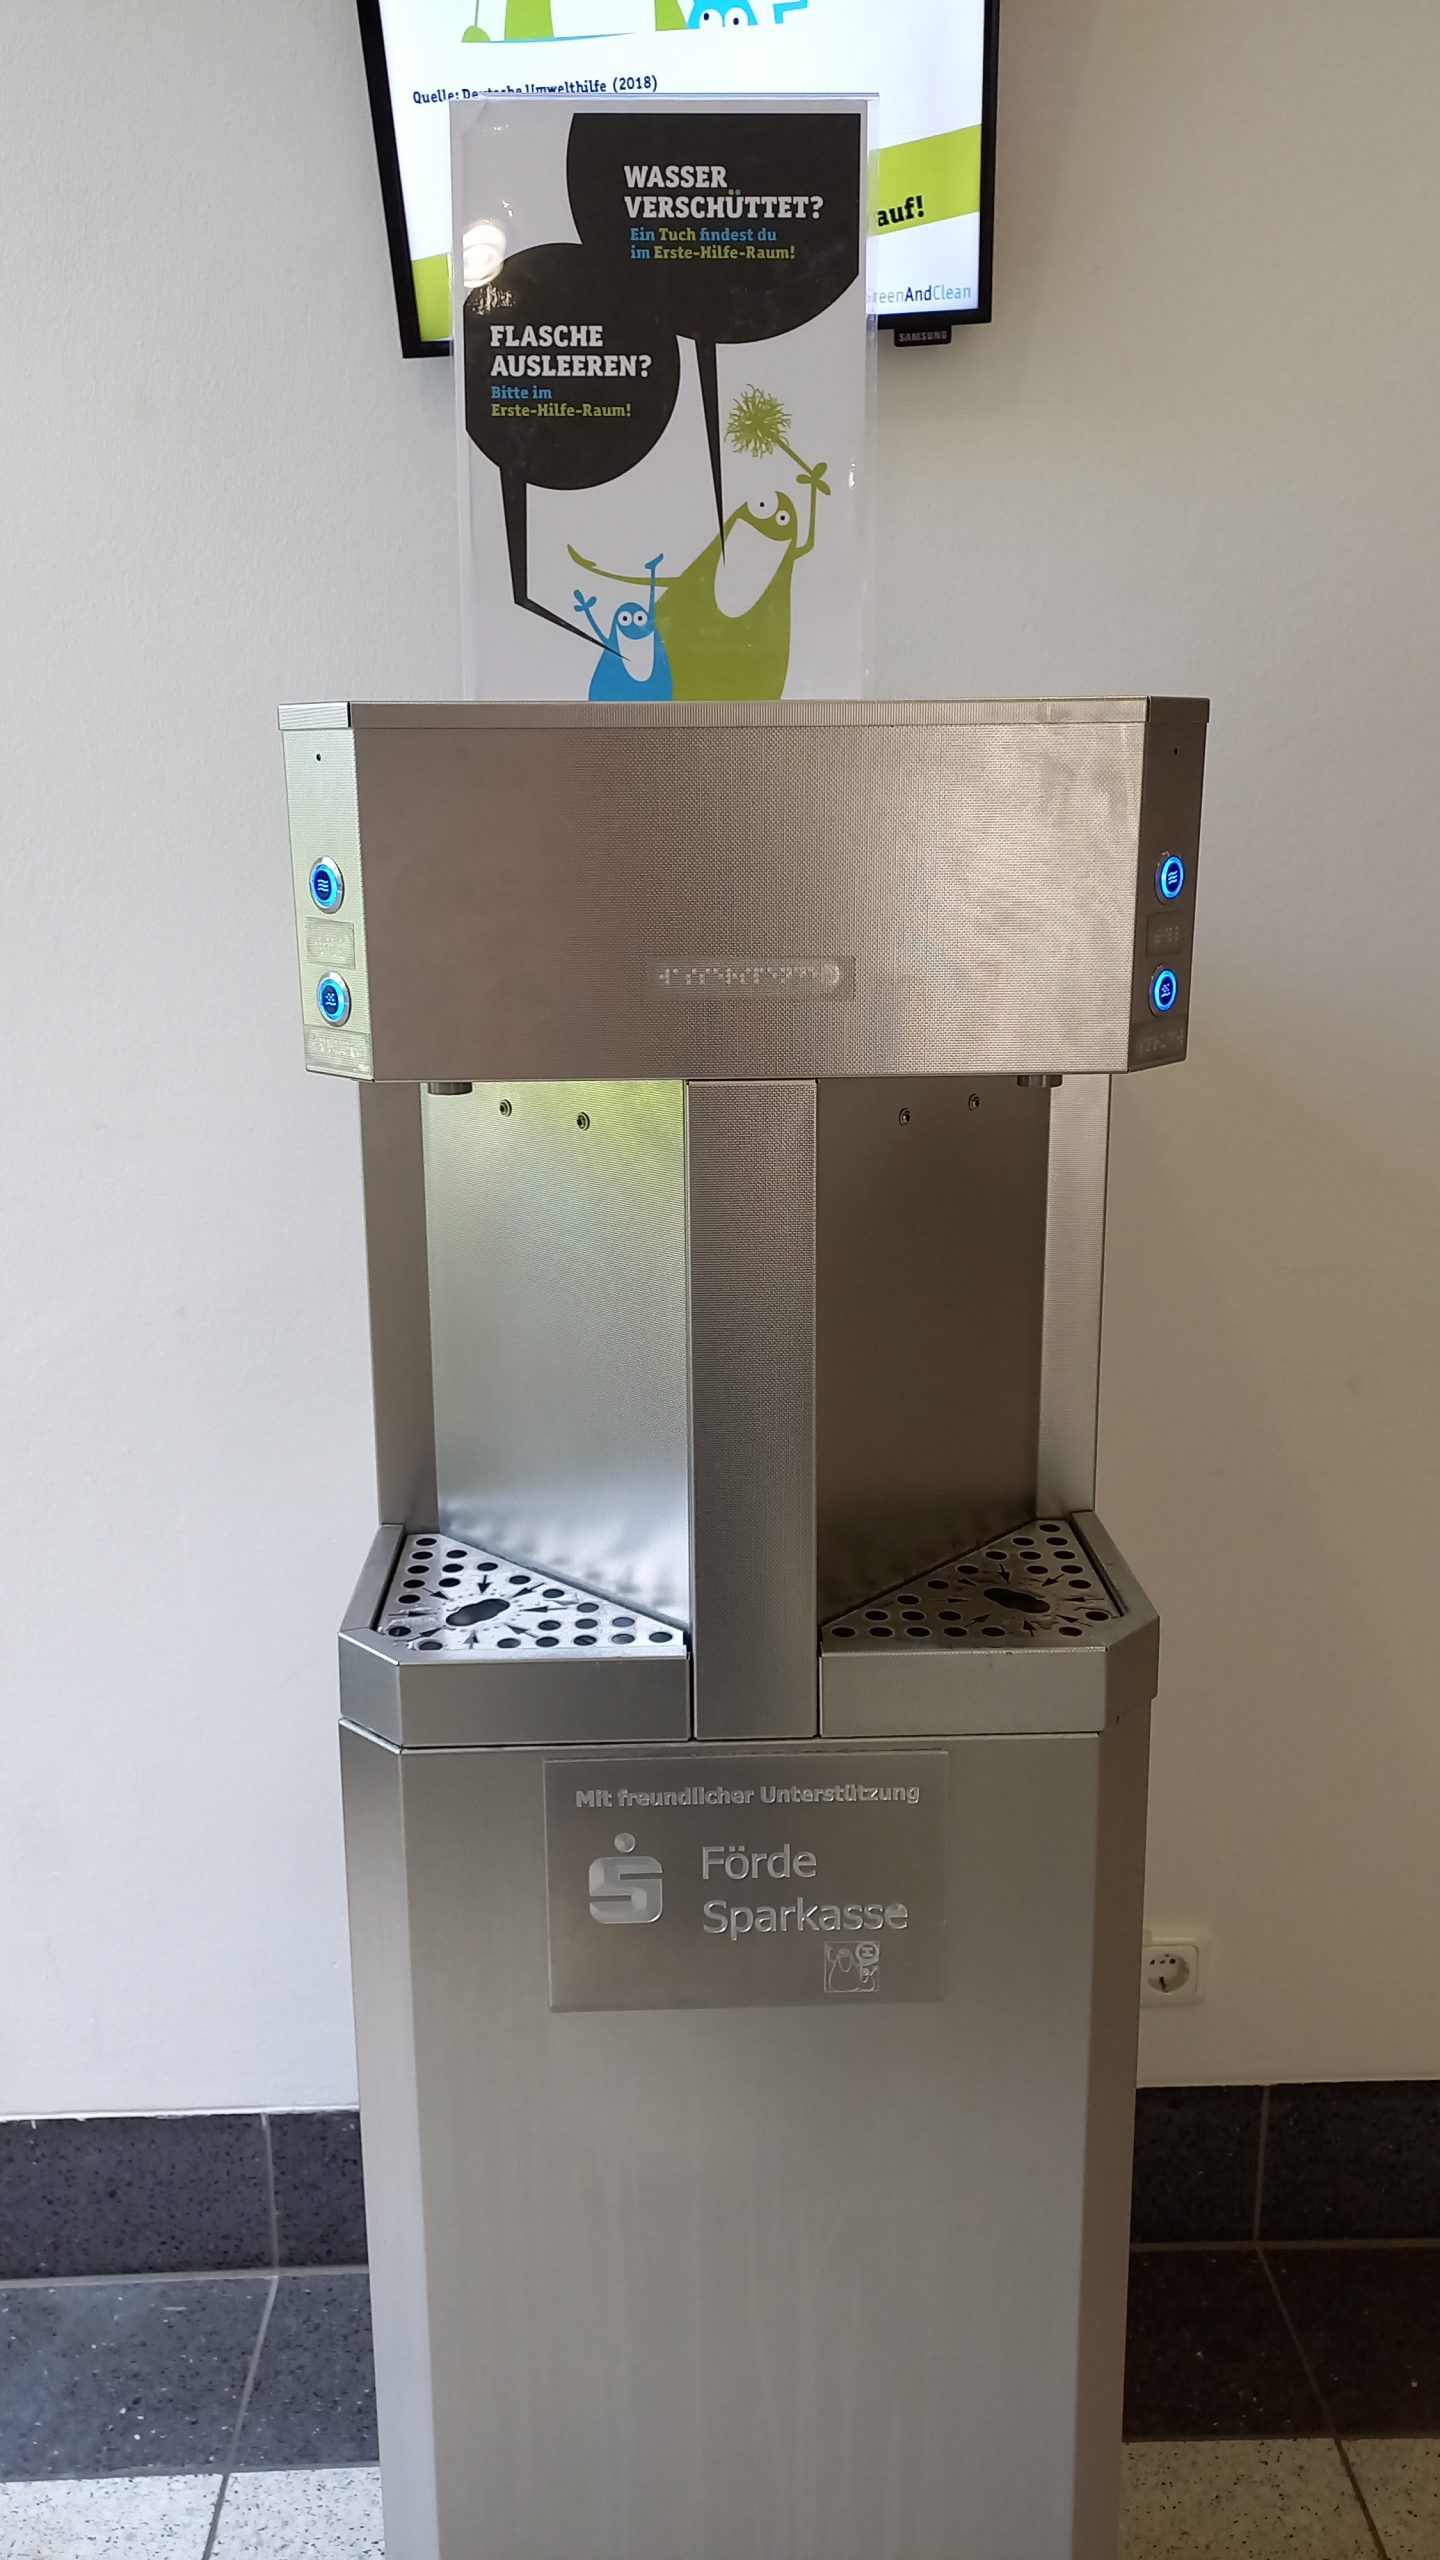 A water dispenser with two slots for water bottles. There's carbonated and non-carbonated water available.